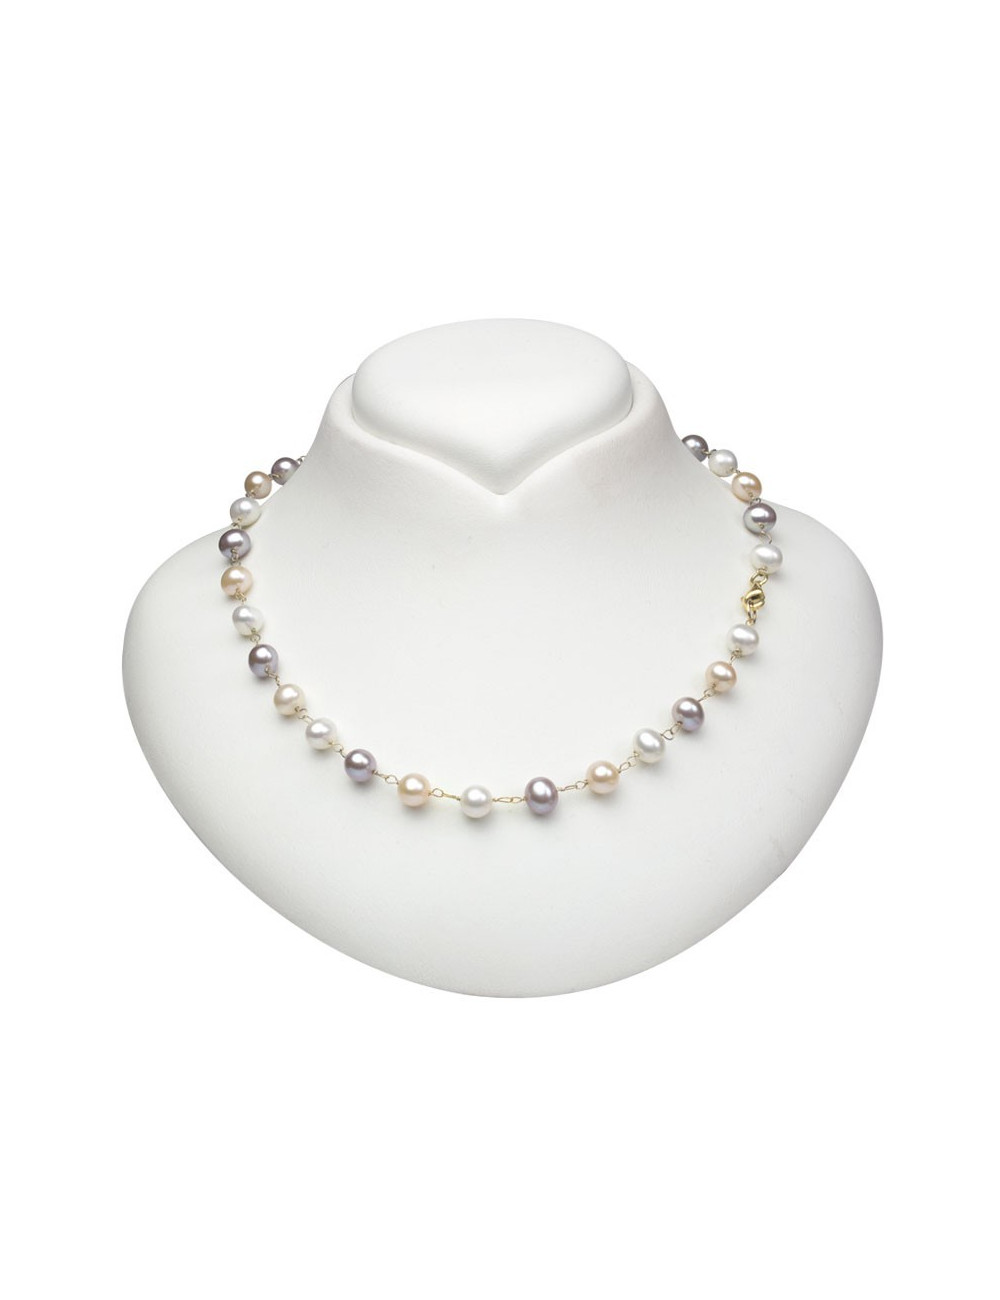 Necklace of white, pink and salmon pearls punctuated with gold links NO657GL